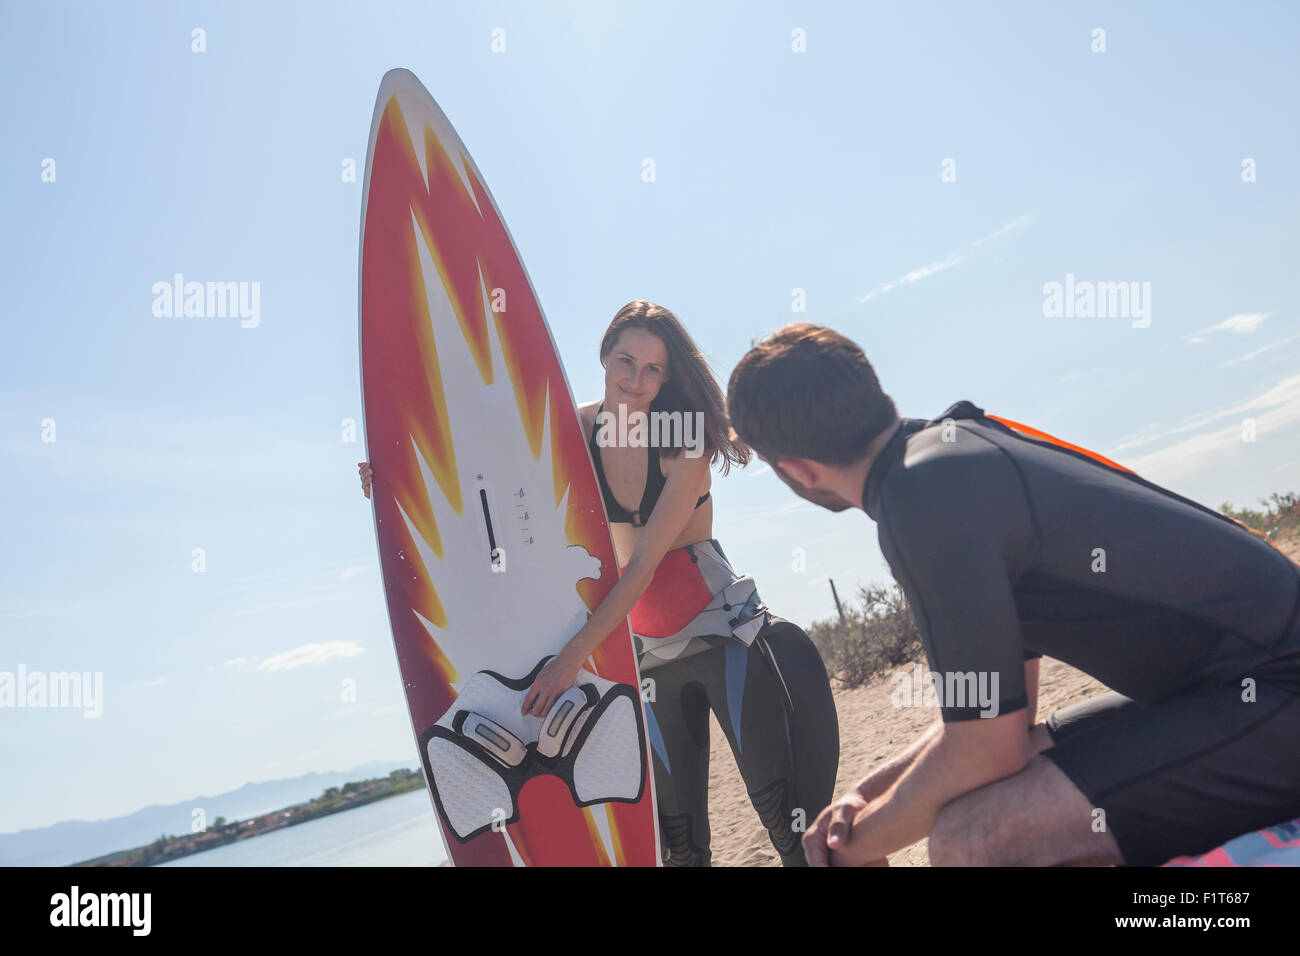 Two surfers on beach Stock Photo